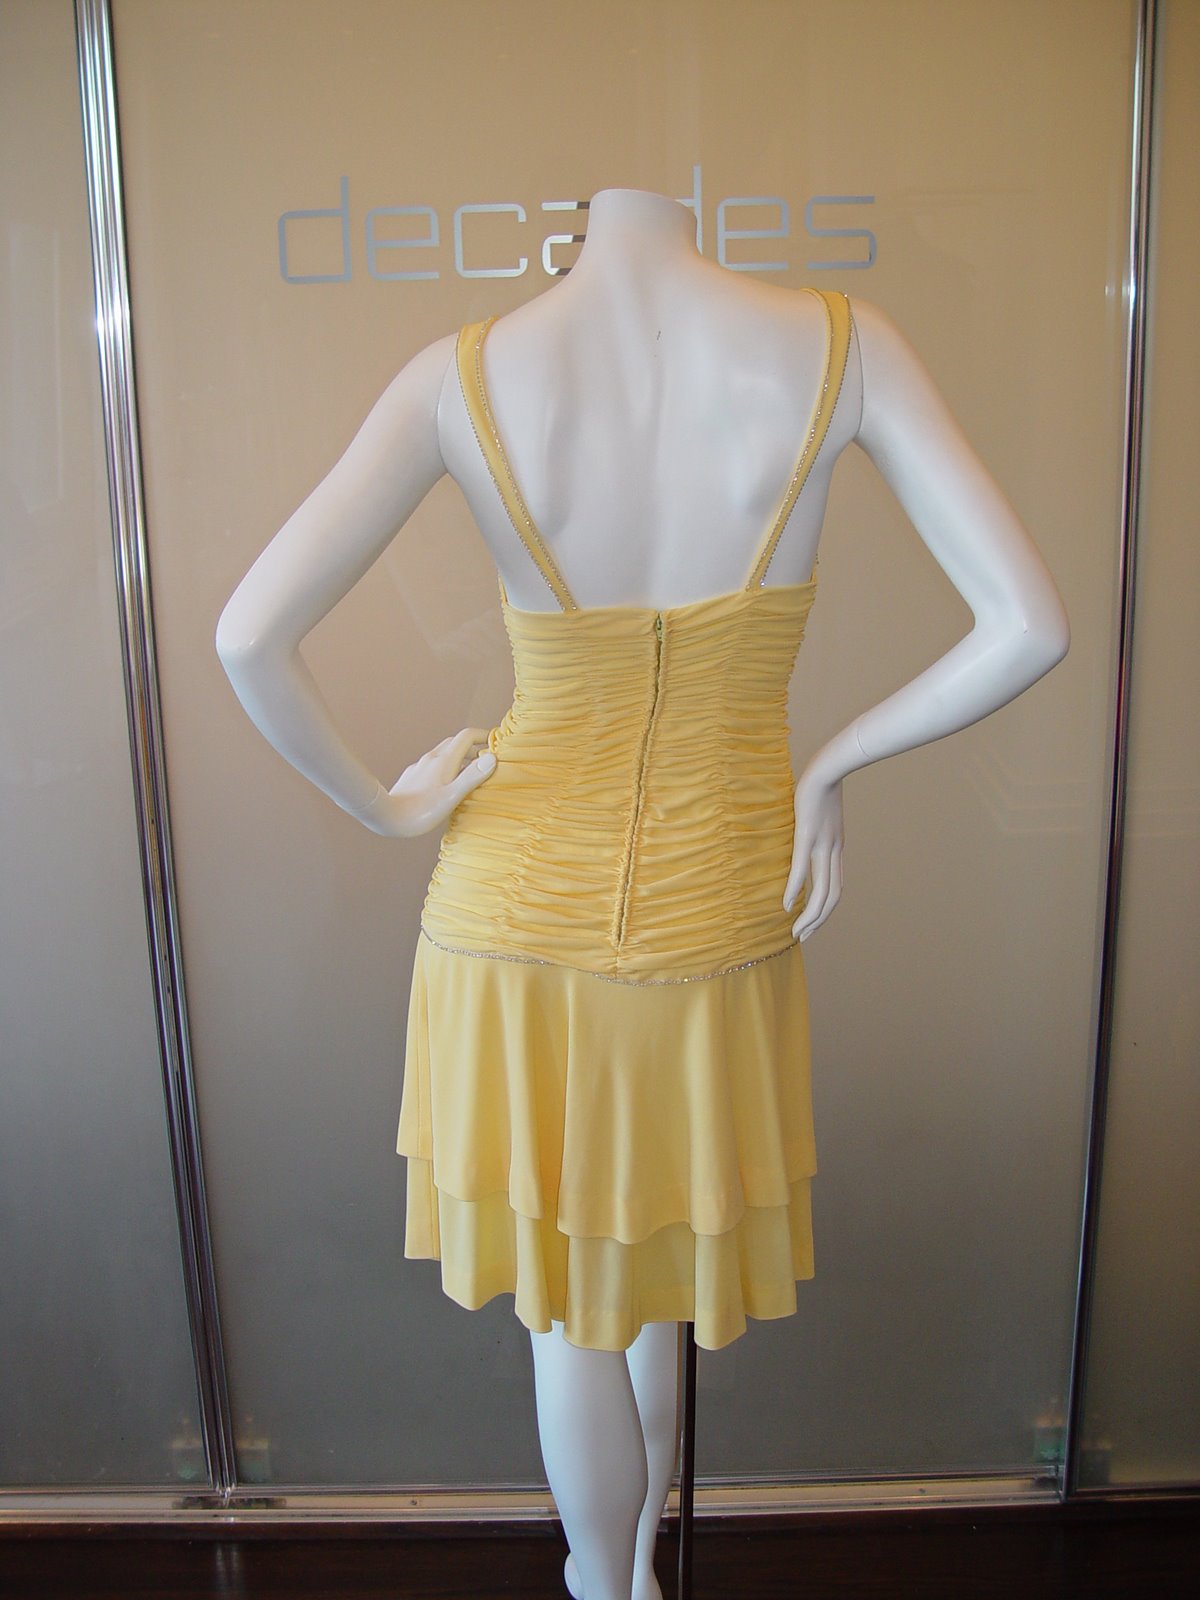 [LORIS+AZZARO+LEMON+HALTER+DRESS+WITH+RUCHED+JERSEY+AND+TIERED+SKIRT+C+80S.JPG.JPG]